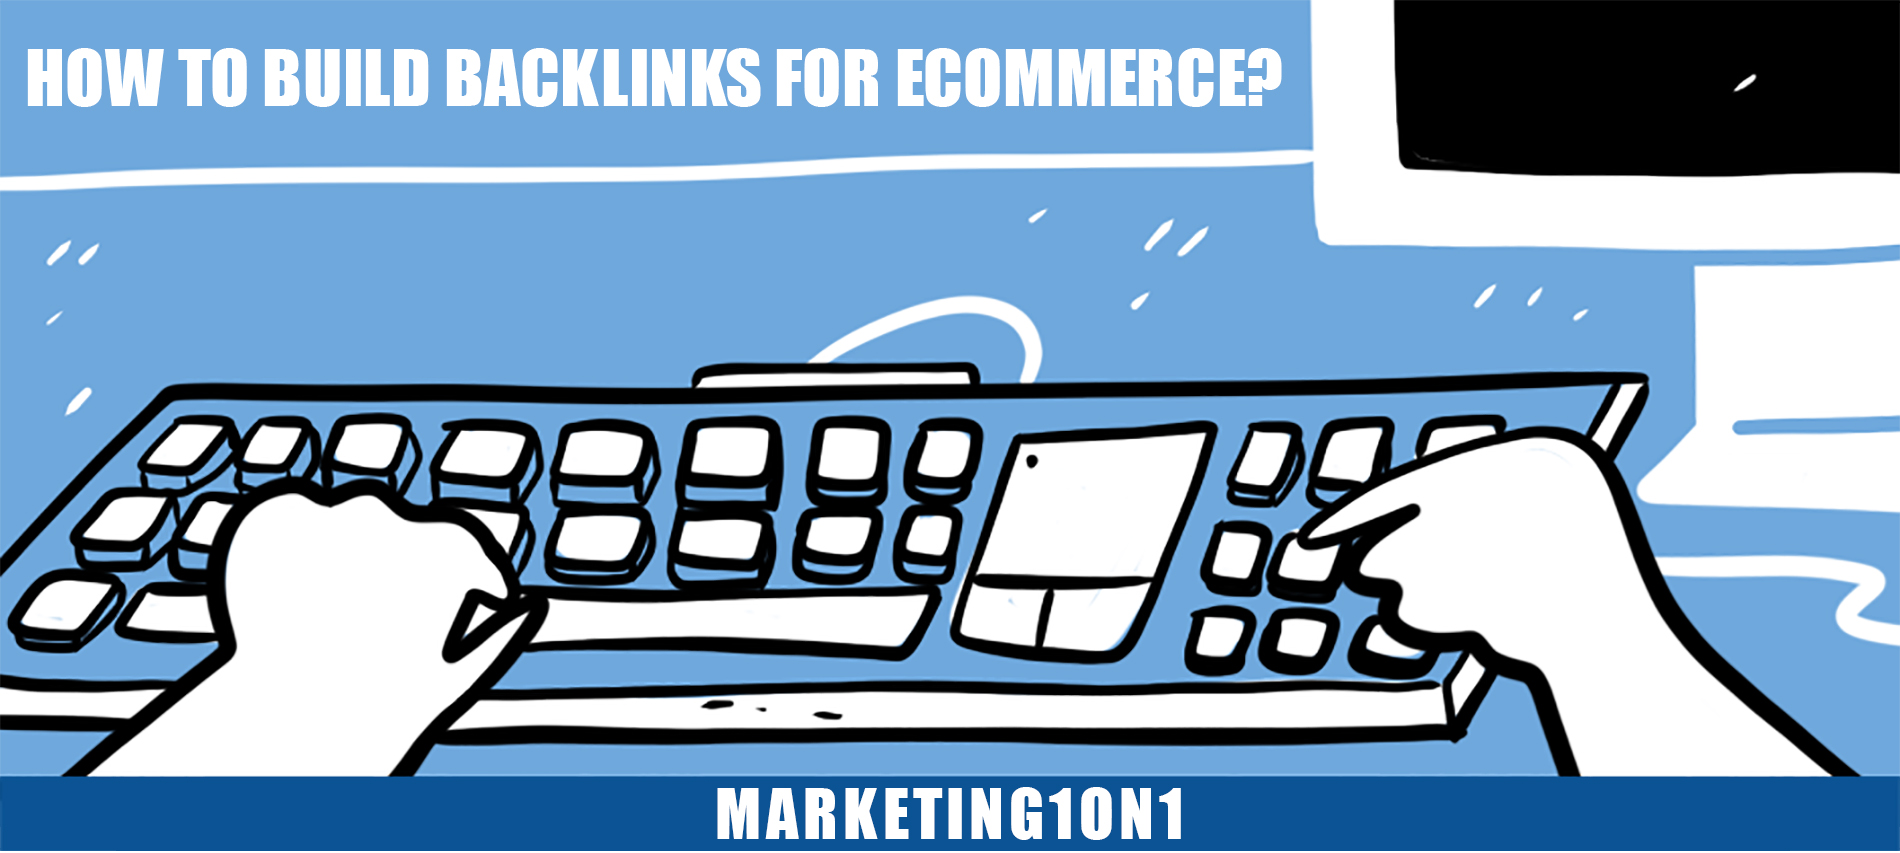 How to build backlinks for eCommerce?